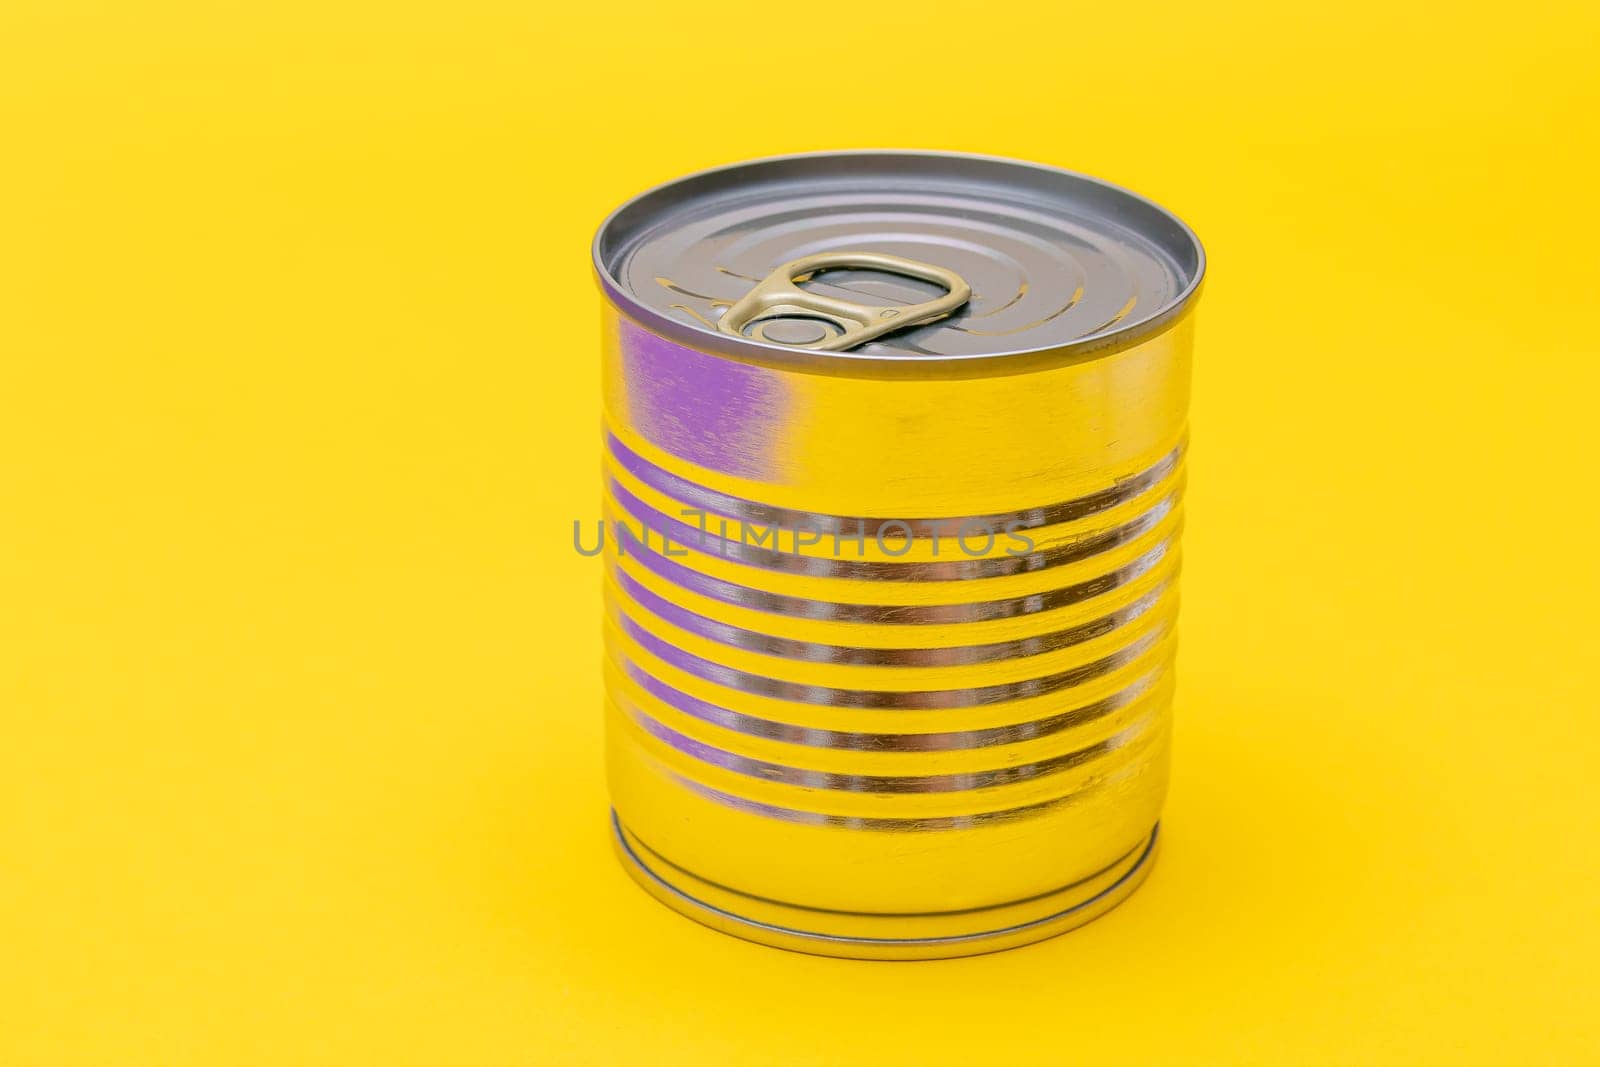 Unopened Tin Can with Blank Edge on Yellow Background. Canned Food. Aluminum Can for Safe and Long Term Storage of Food. Steel Sealed Food Storage Container